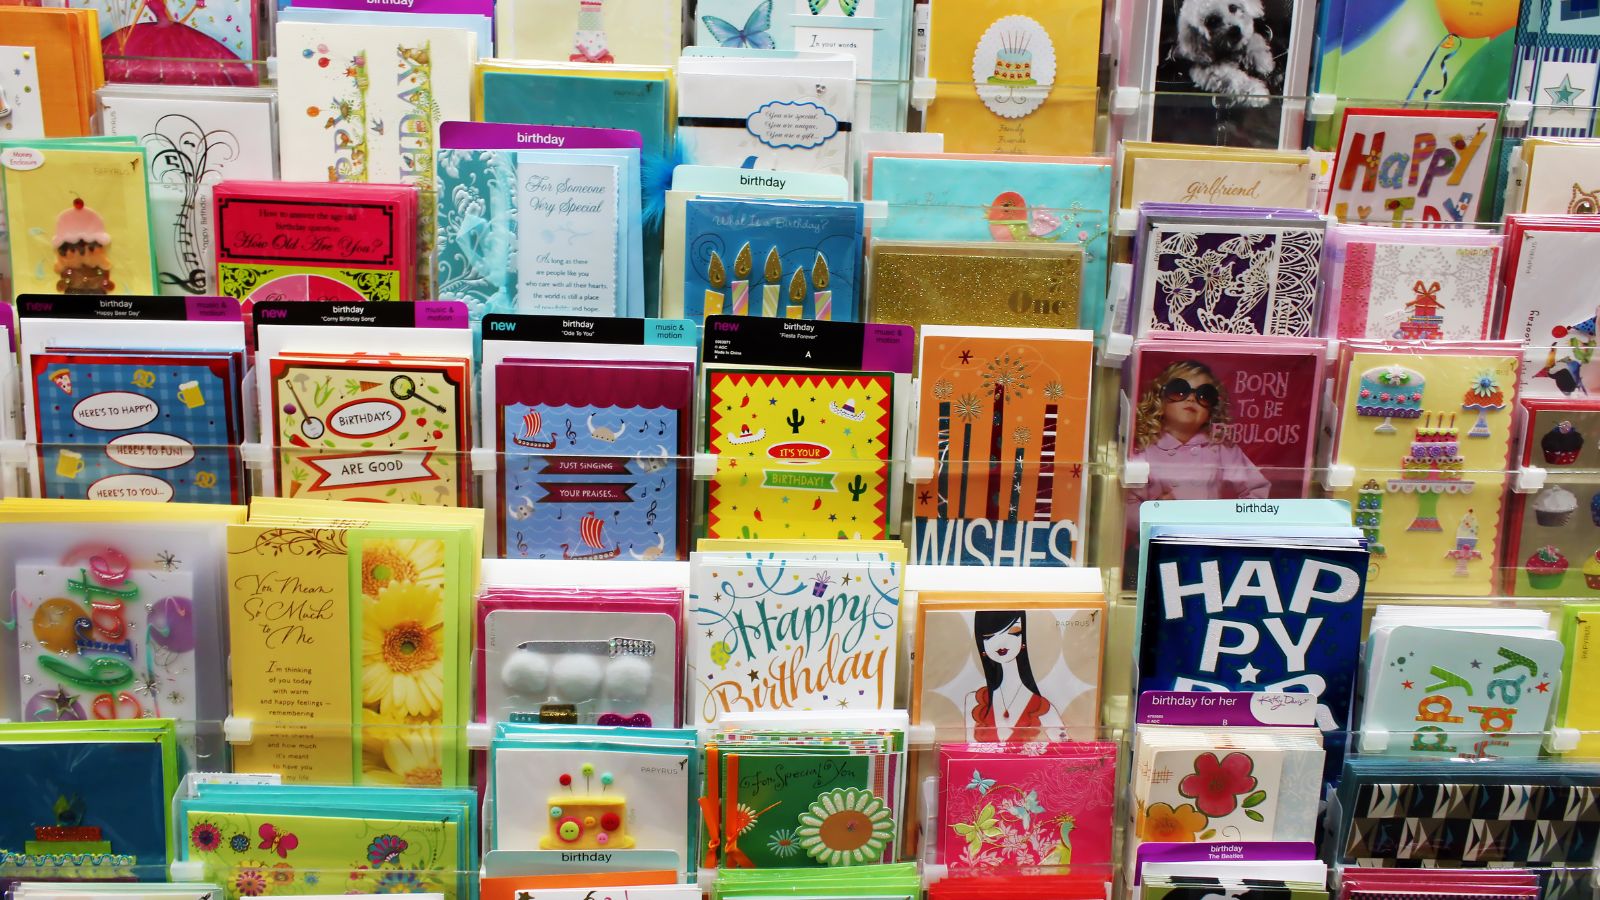 <p>Greeting cards can be surprisingly pricey, considering they are often a simple piece of printed cardboard. The tradition of giving cards persists, however, and many find the cost a small price to pay for expressing sentiments.</p>